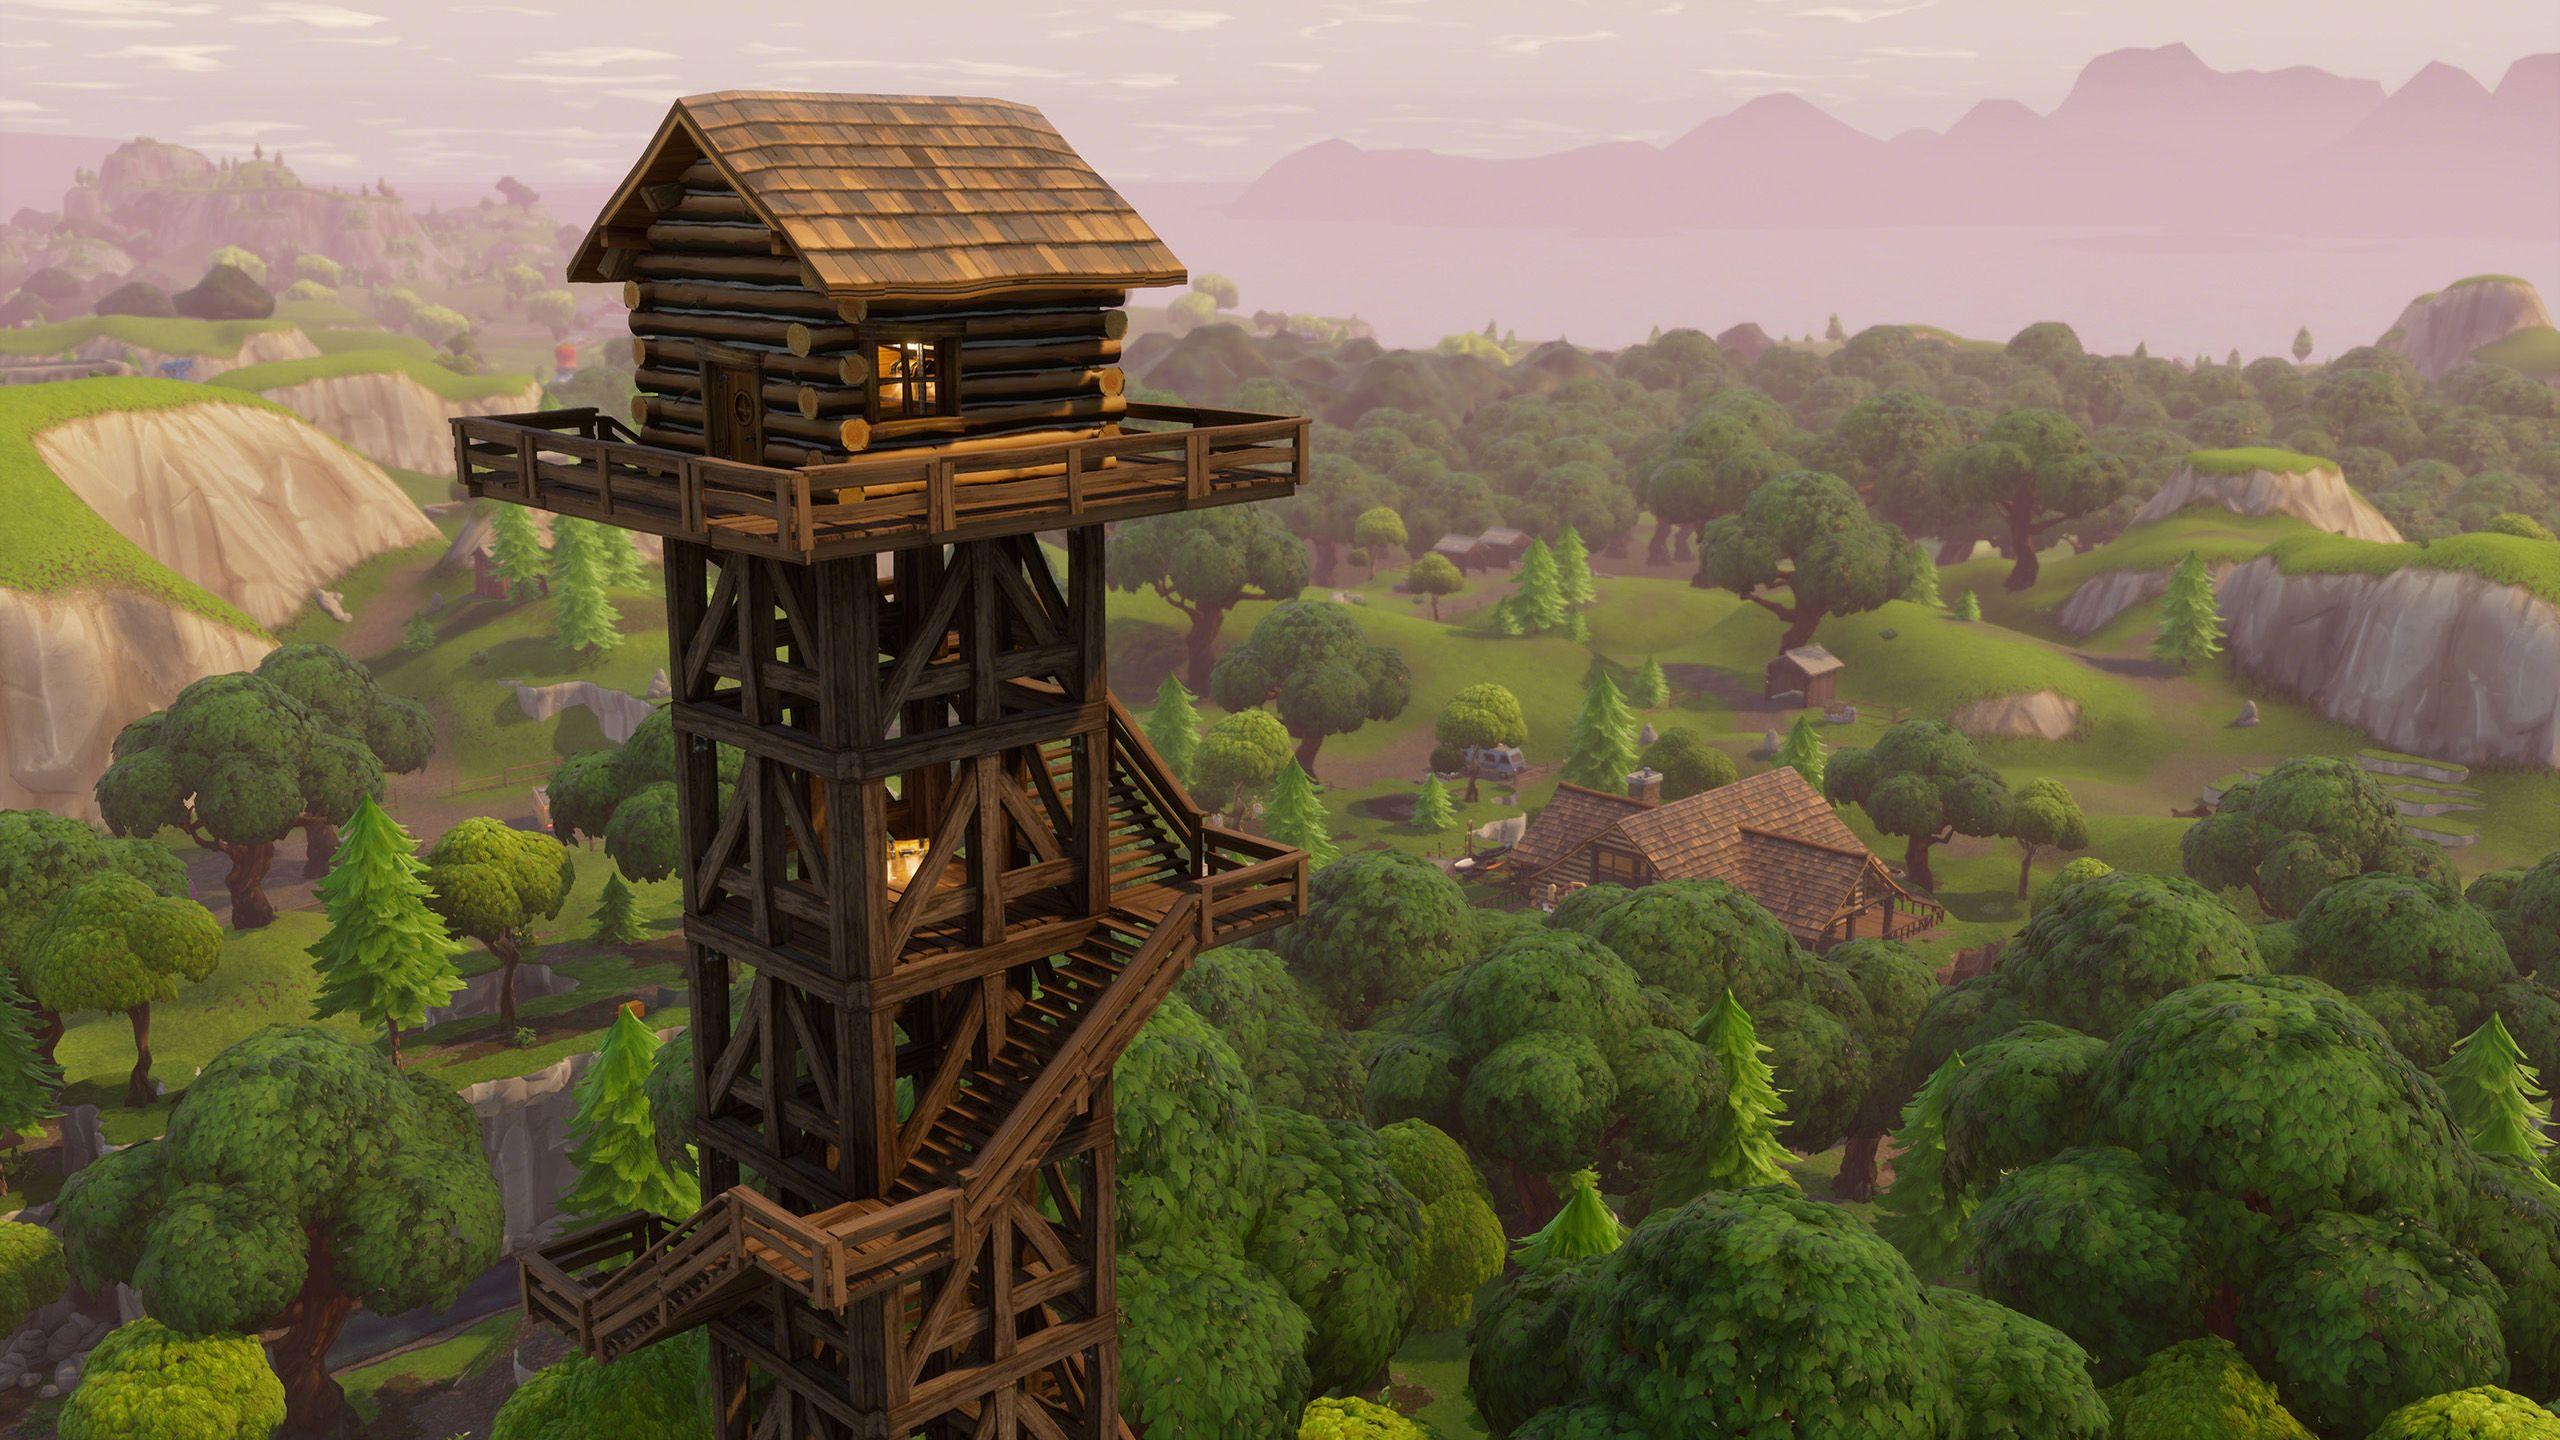 FortNite: A Game With Unfulfilled Potential